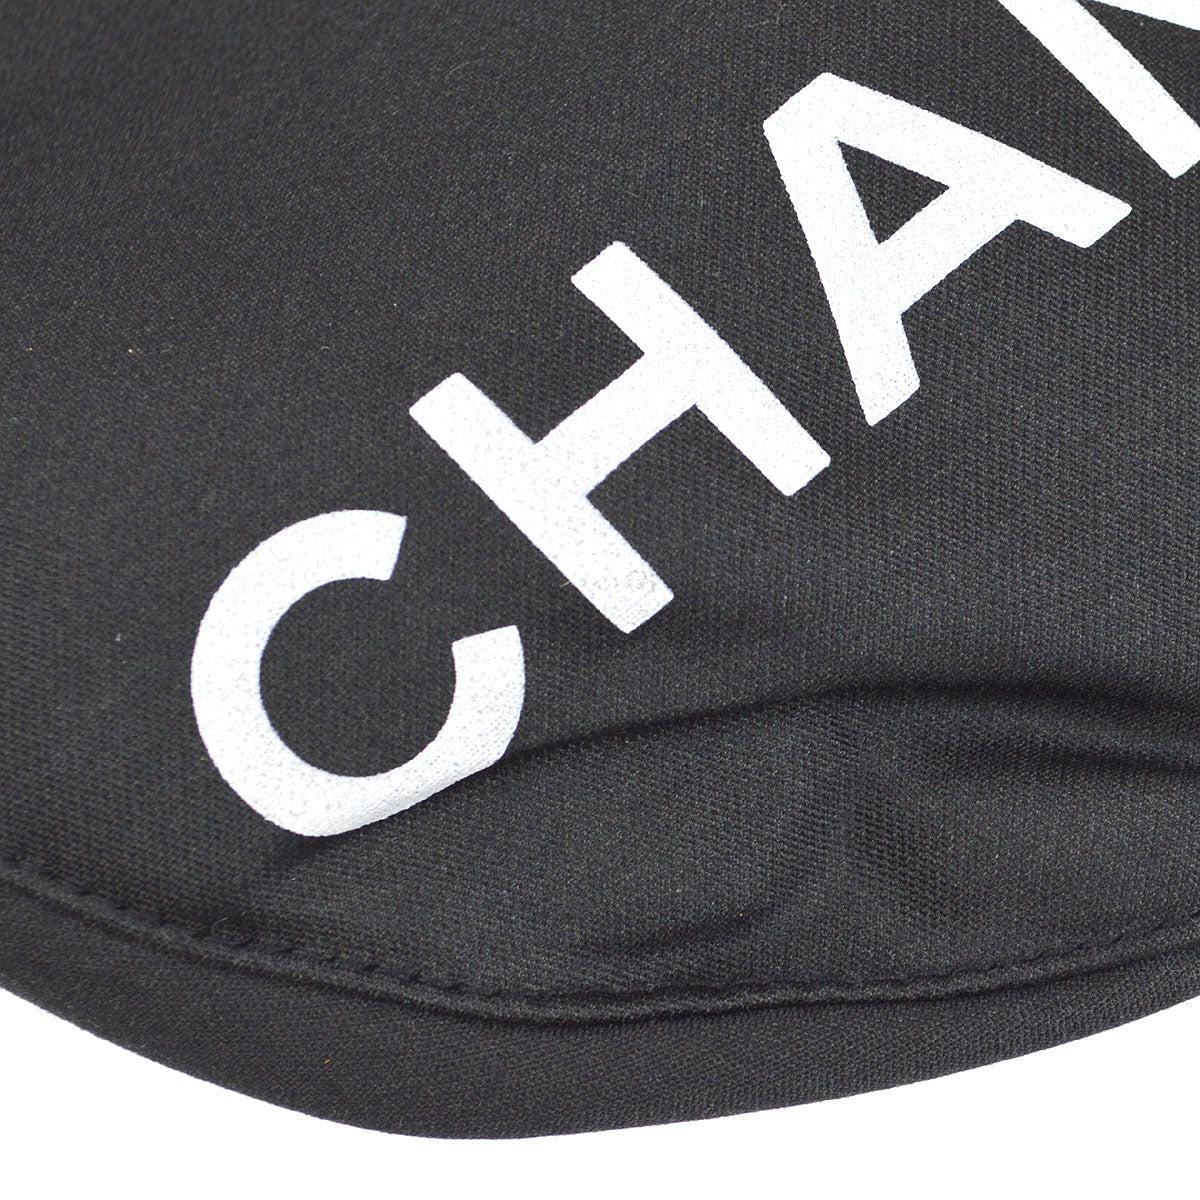 CHANEL Black White Logo Cotton Silk Blend Paperboy Cap Hat  In Good Condition For Sale In Chicago, IL